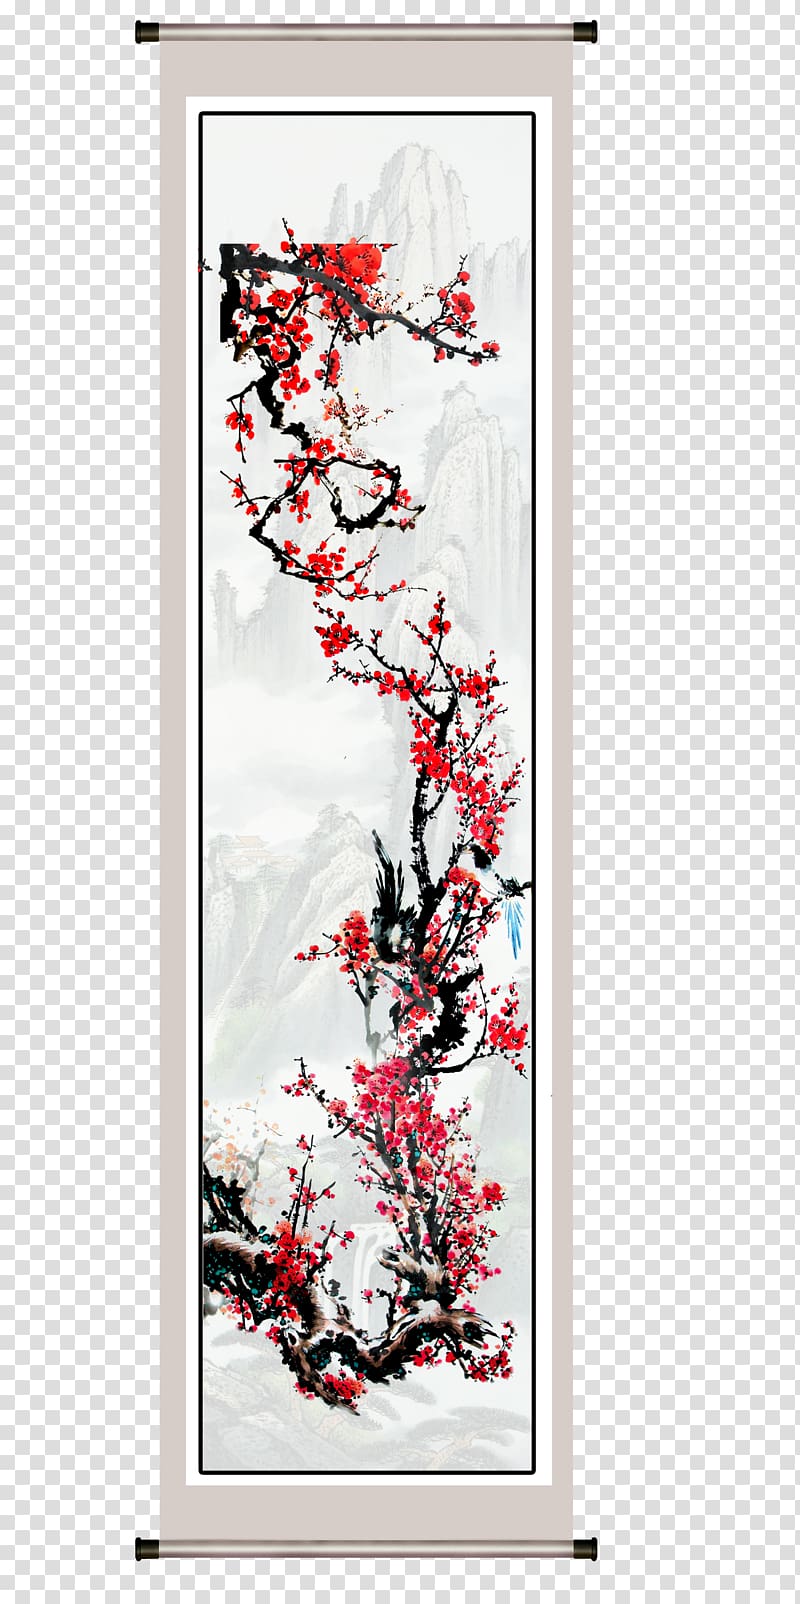 Ink wash painting Plum blossom Hanging scroll, Plum hanging scroll transparent background PNG clipart